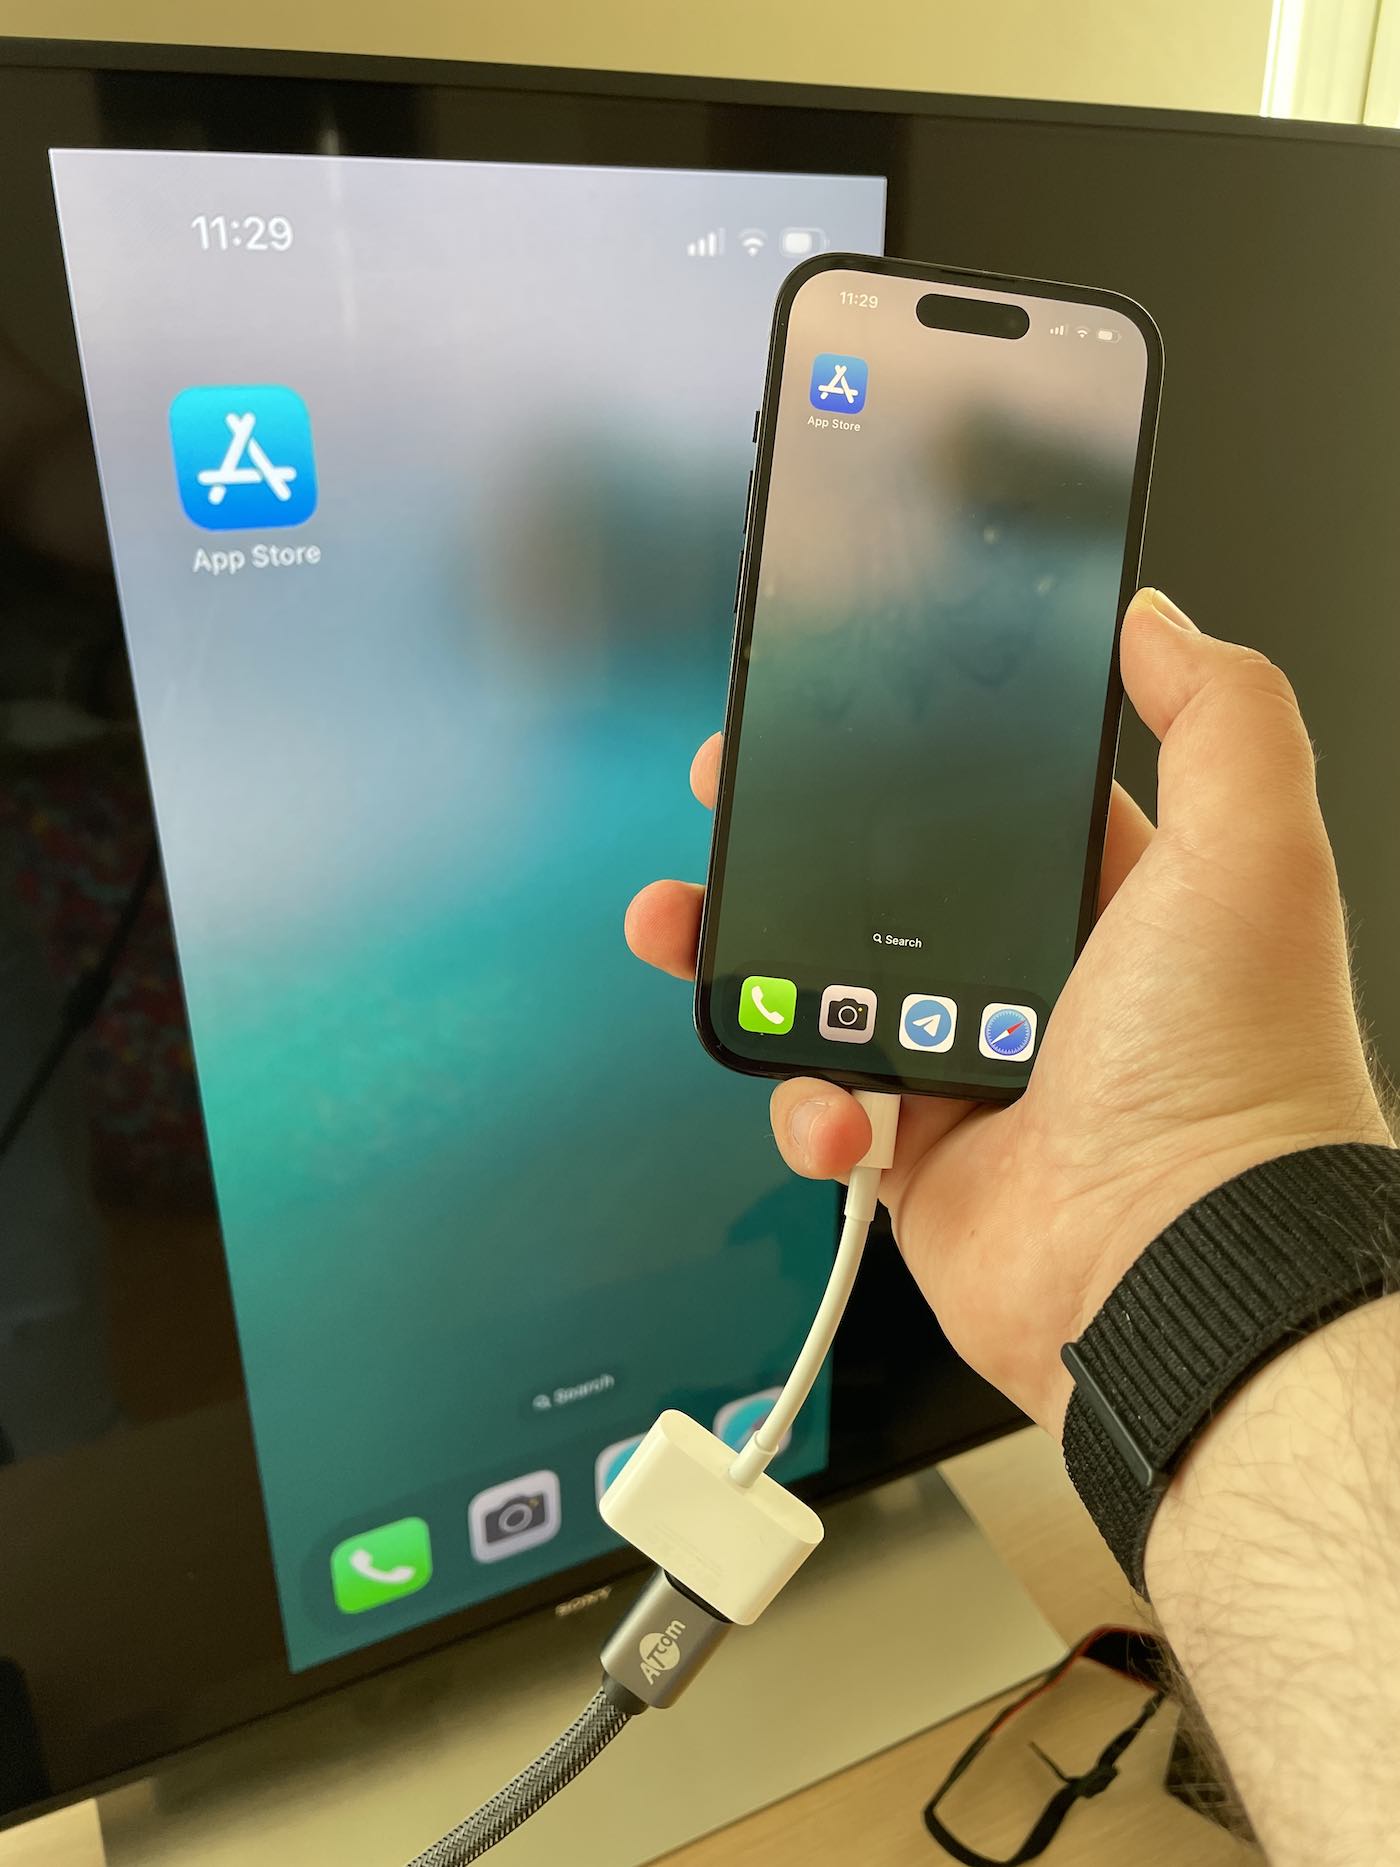 Connecting your iPhone to TV through the HDMI cable